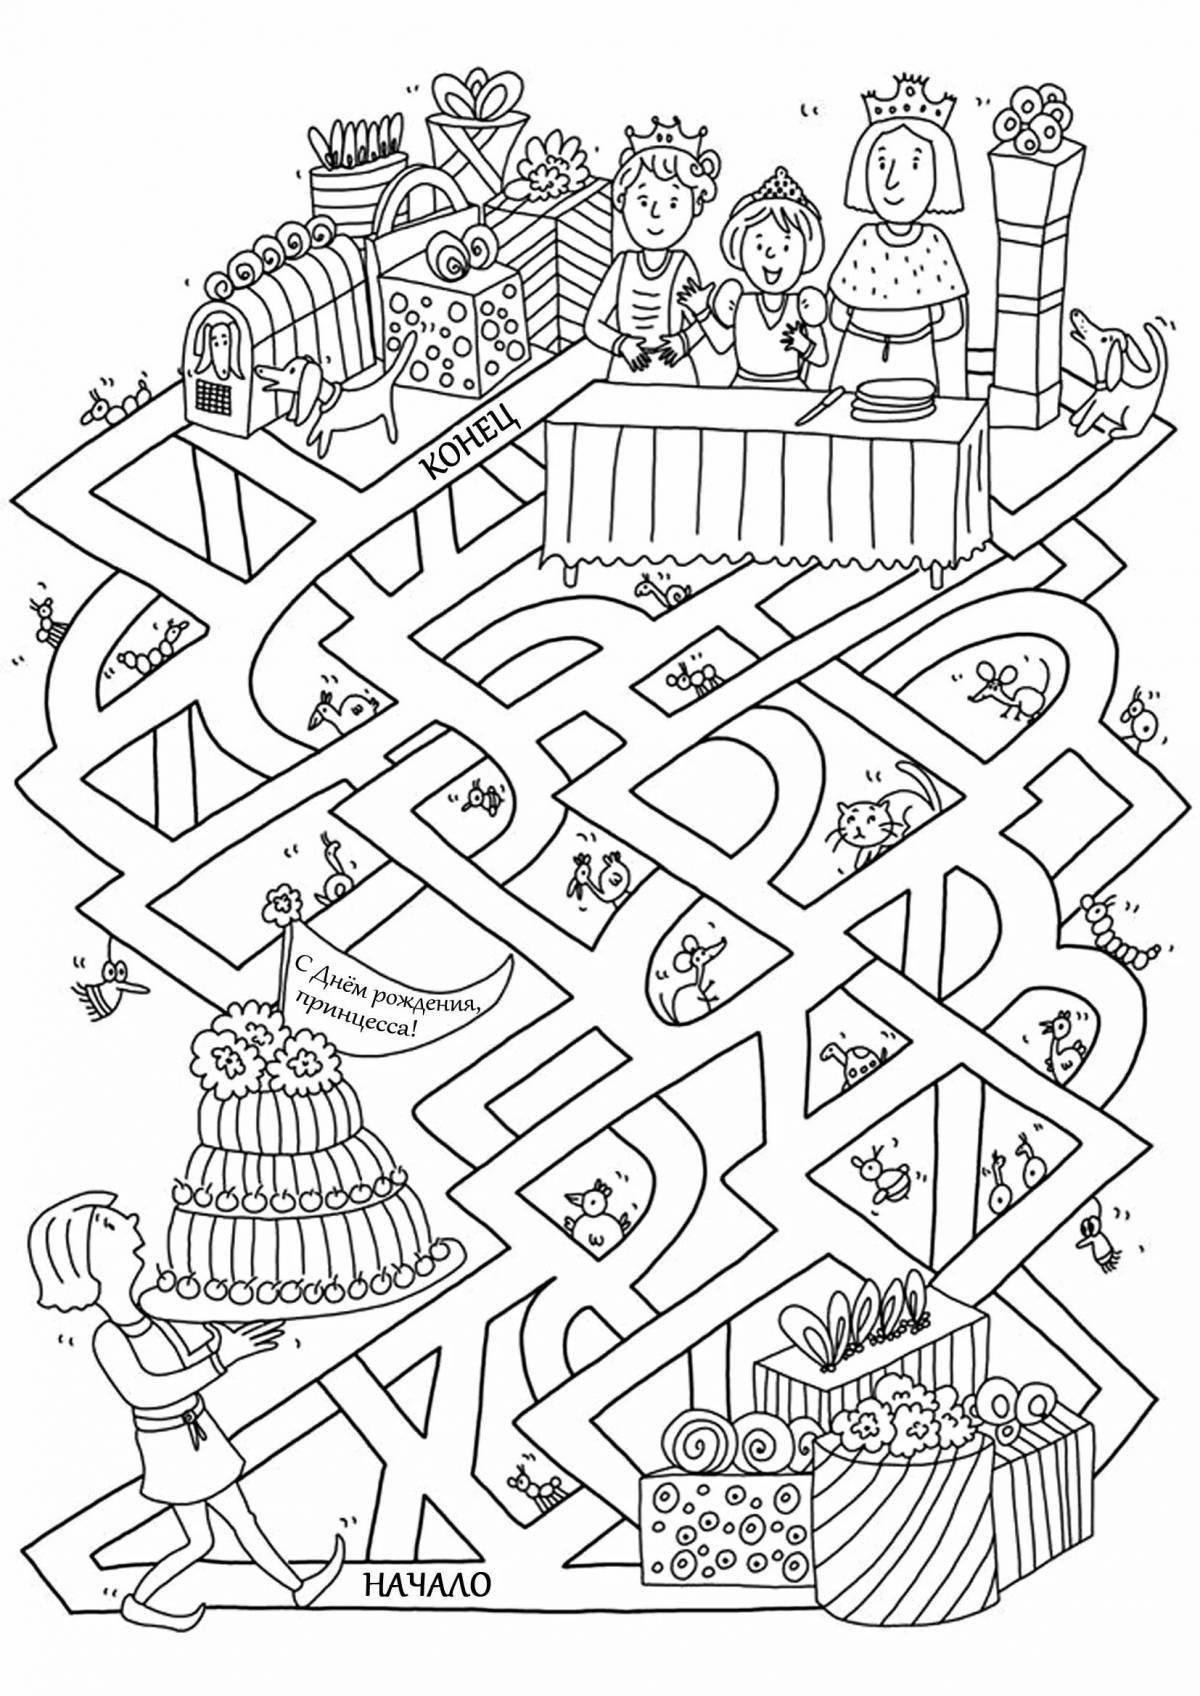 Charming maze coloring book for 7 year olds